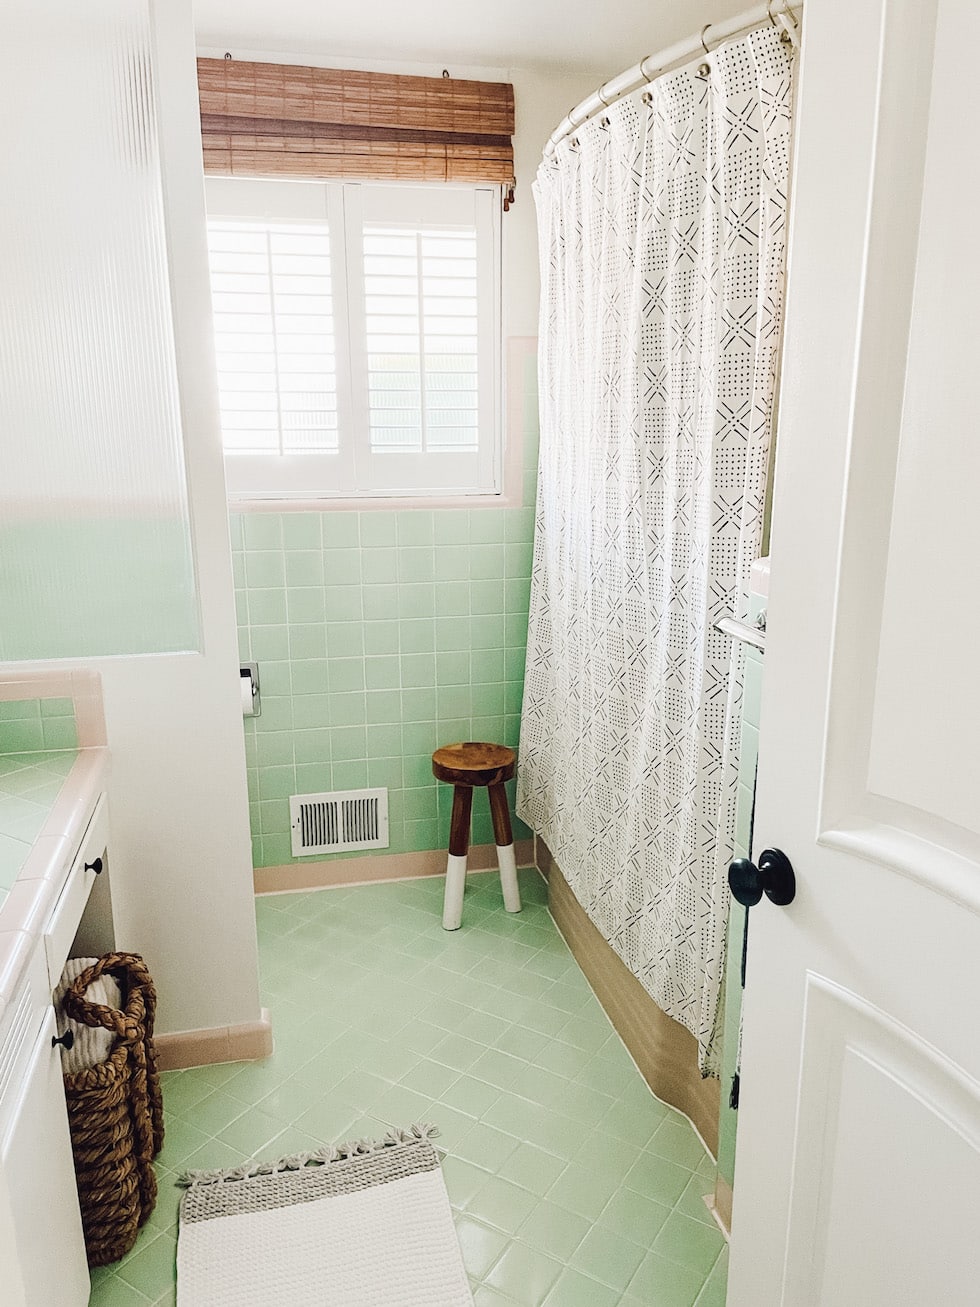 7 Updates to Our Vintage Mint Green and Pink Bathroom (and redefining home goals!)